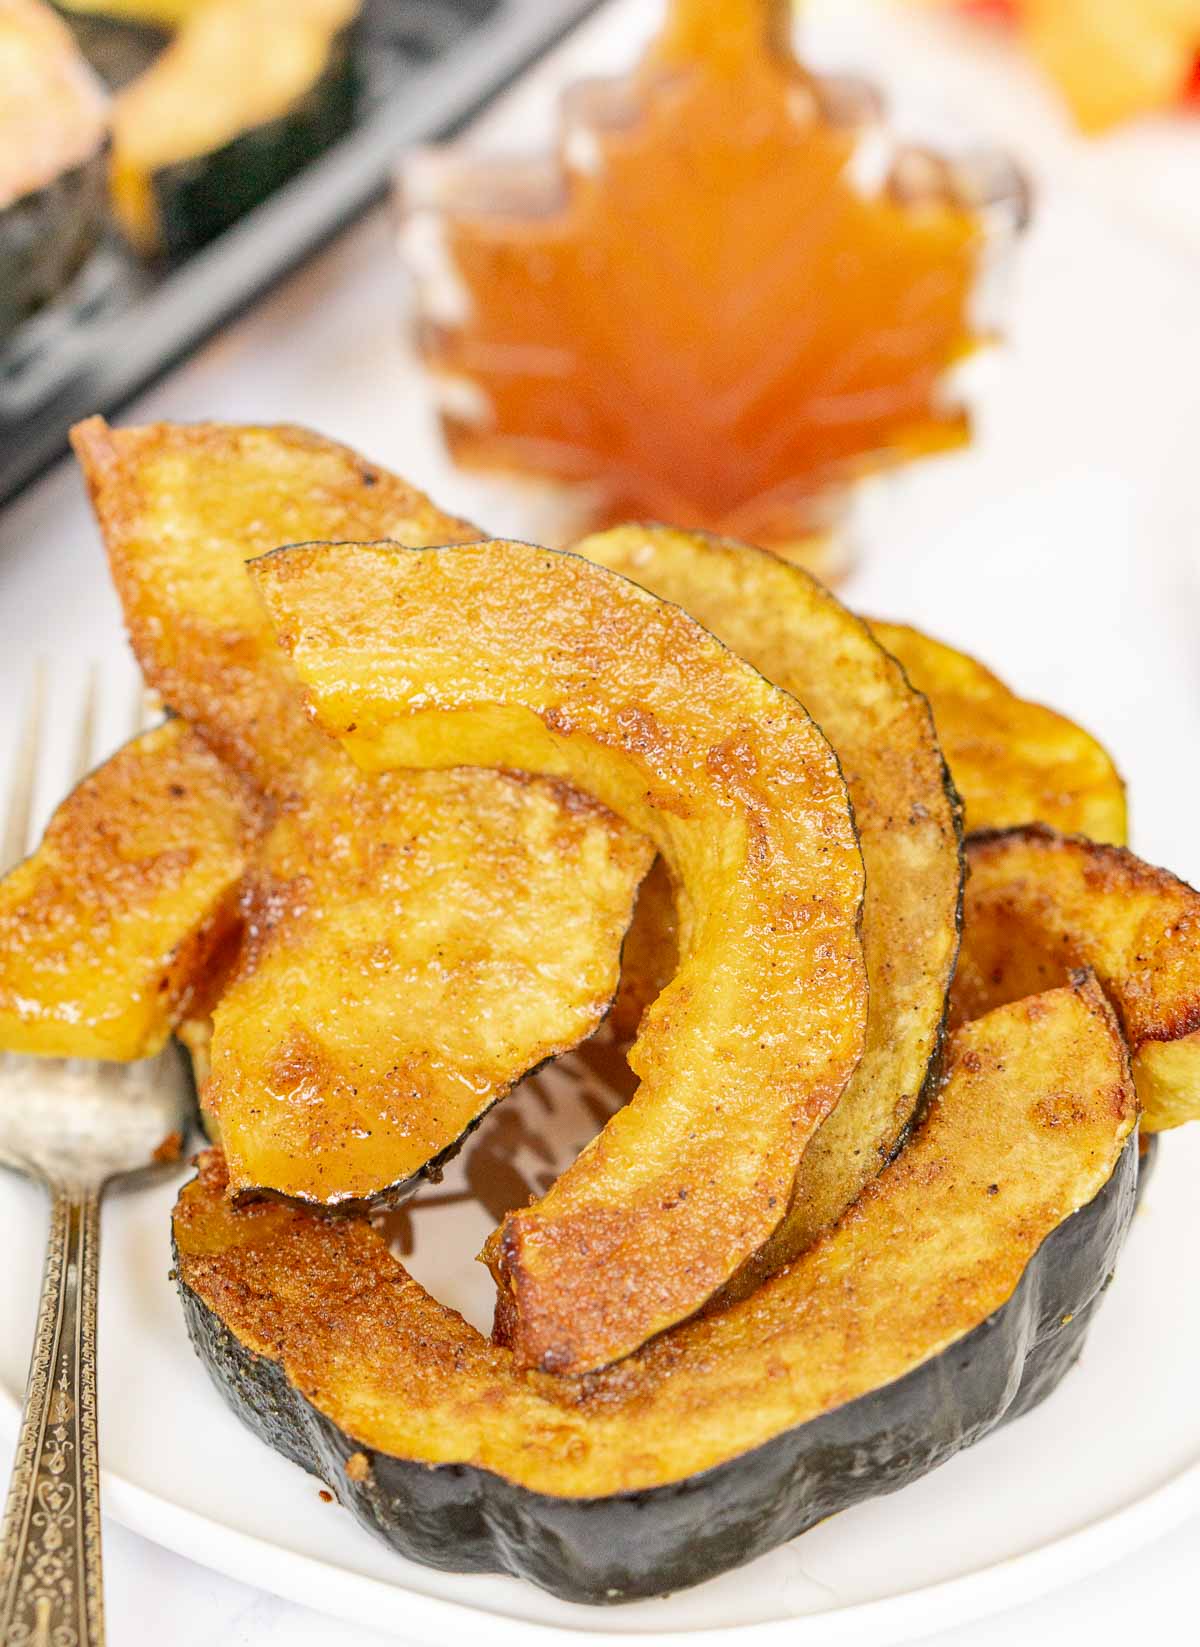 Slices of air fried acorn squash on a plate